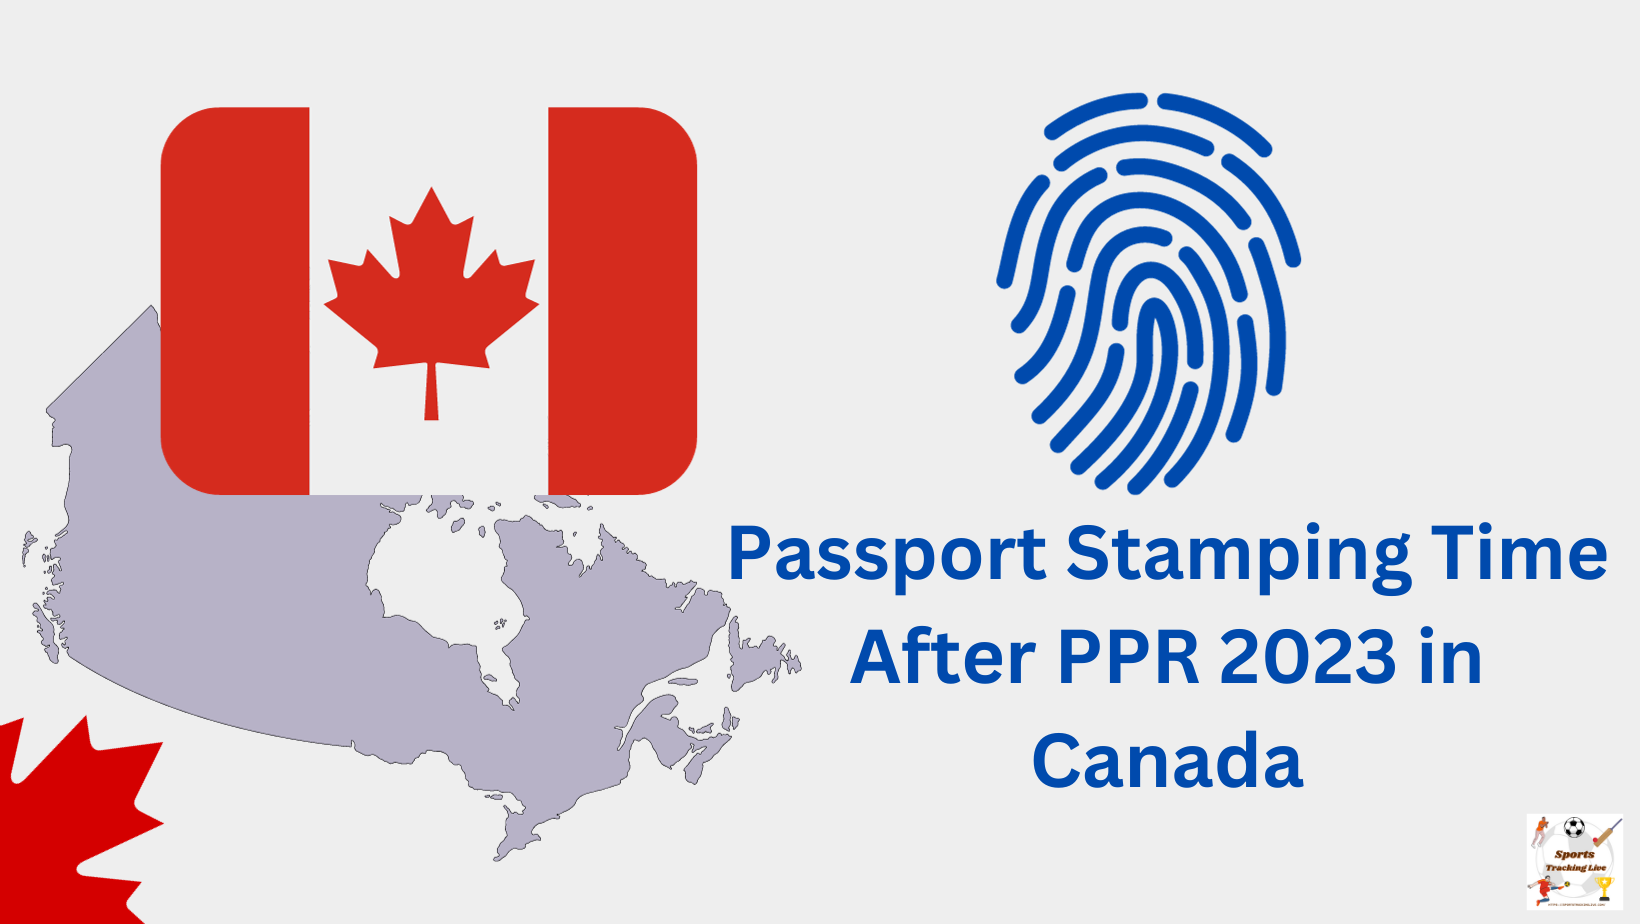 Passport Stamping Time after PPR 2023 in Canada